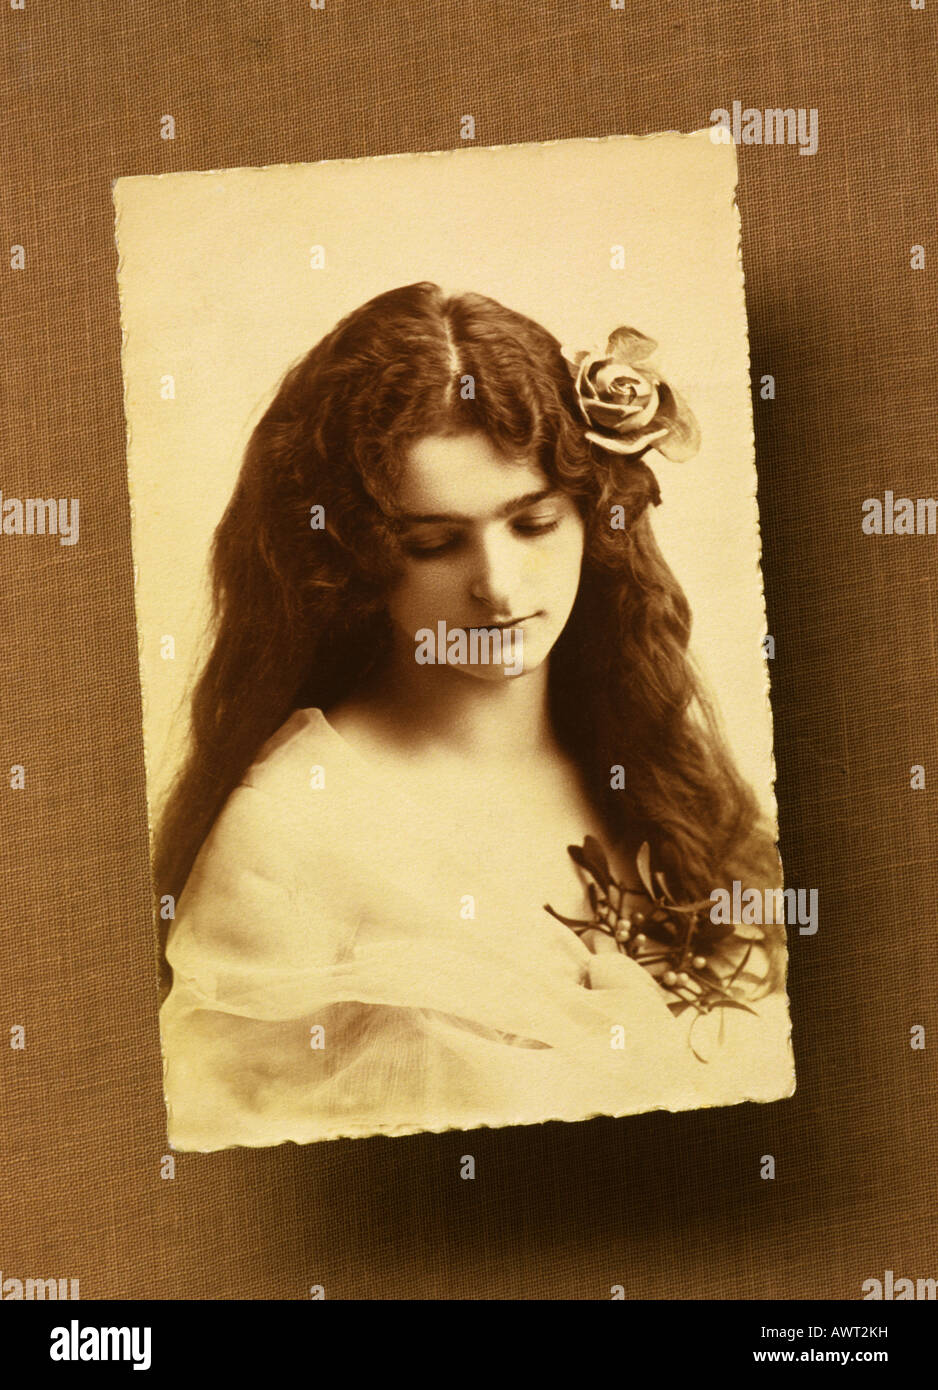 1920's vintage portrait of a young woman with long dark hair Stock Photo